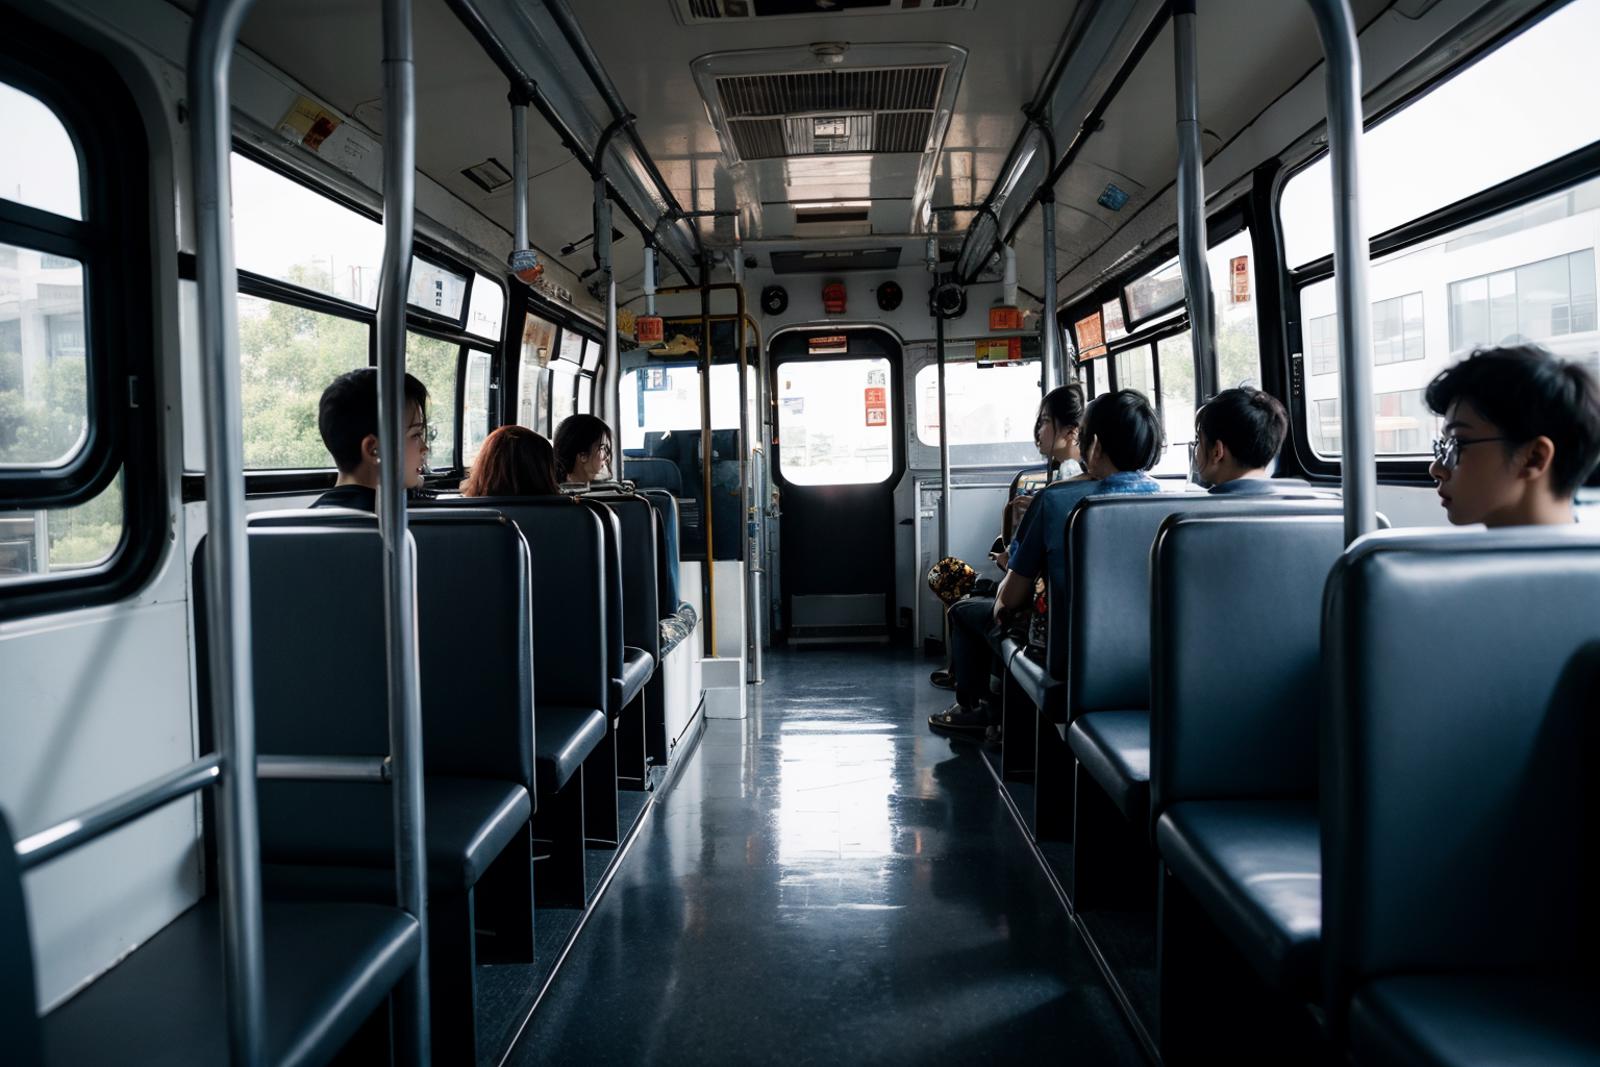 bus interior image by ruanyi